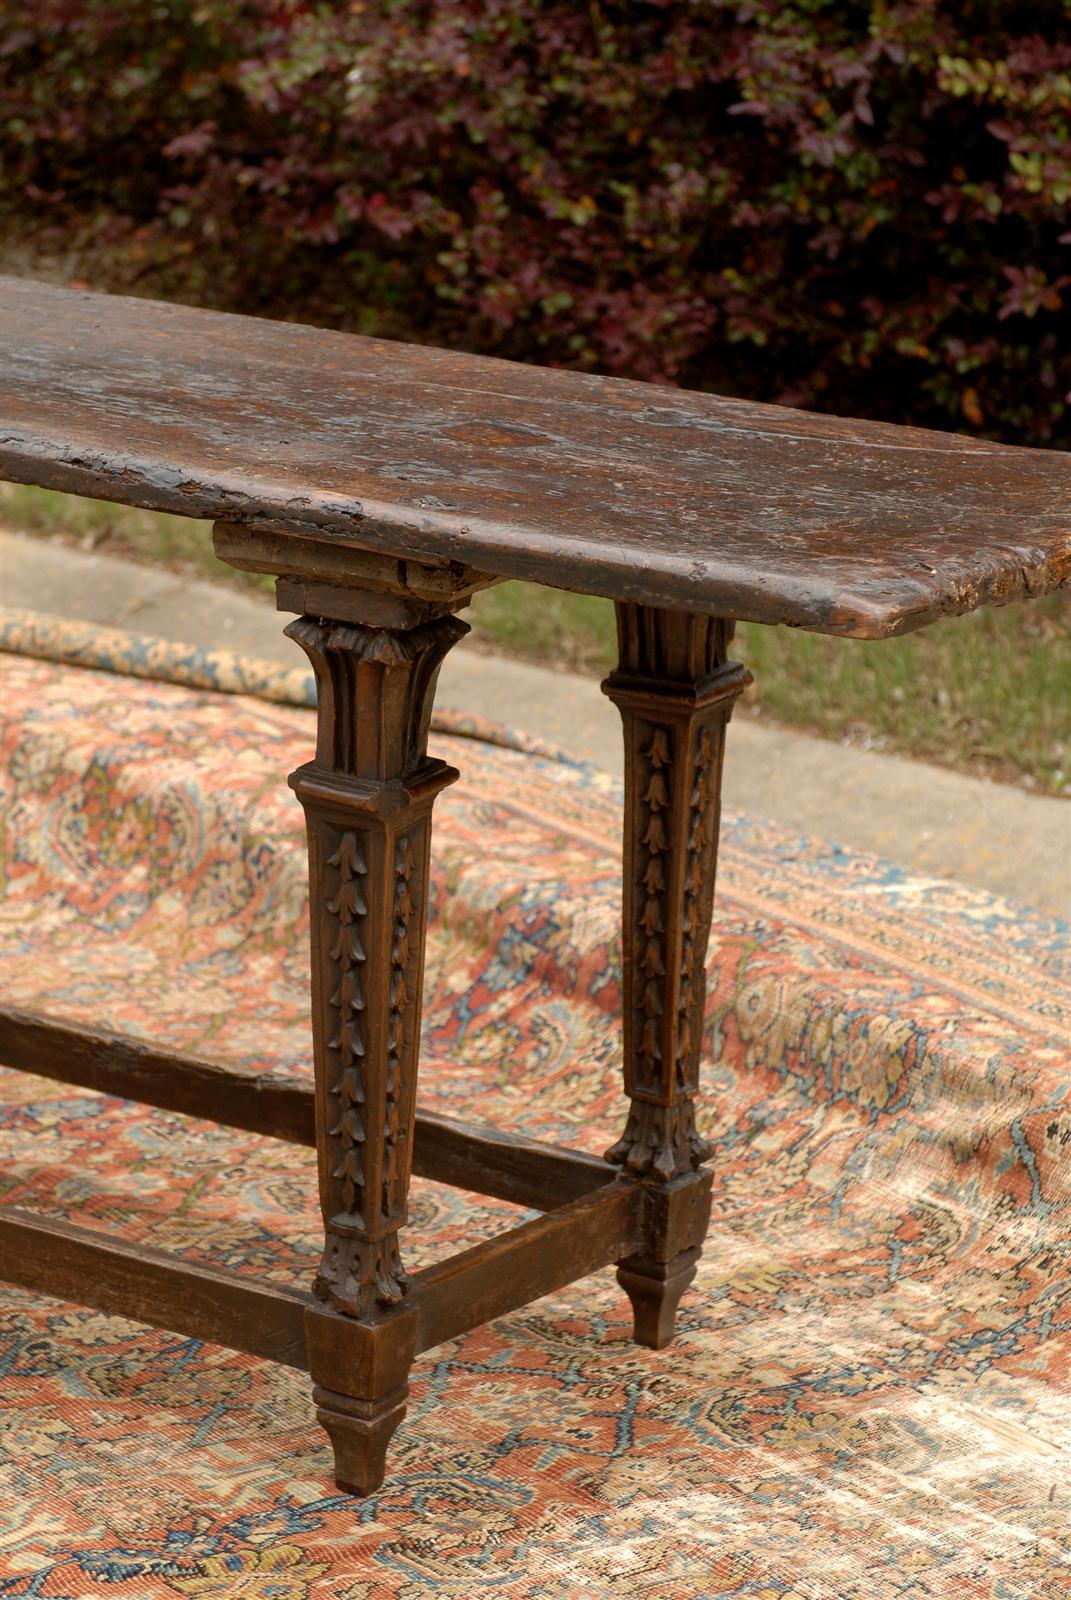 1700s Italian Baroque Long Table with Rustic Top and Garland Adorned Legs 2